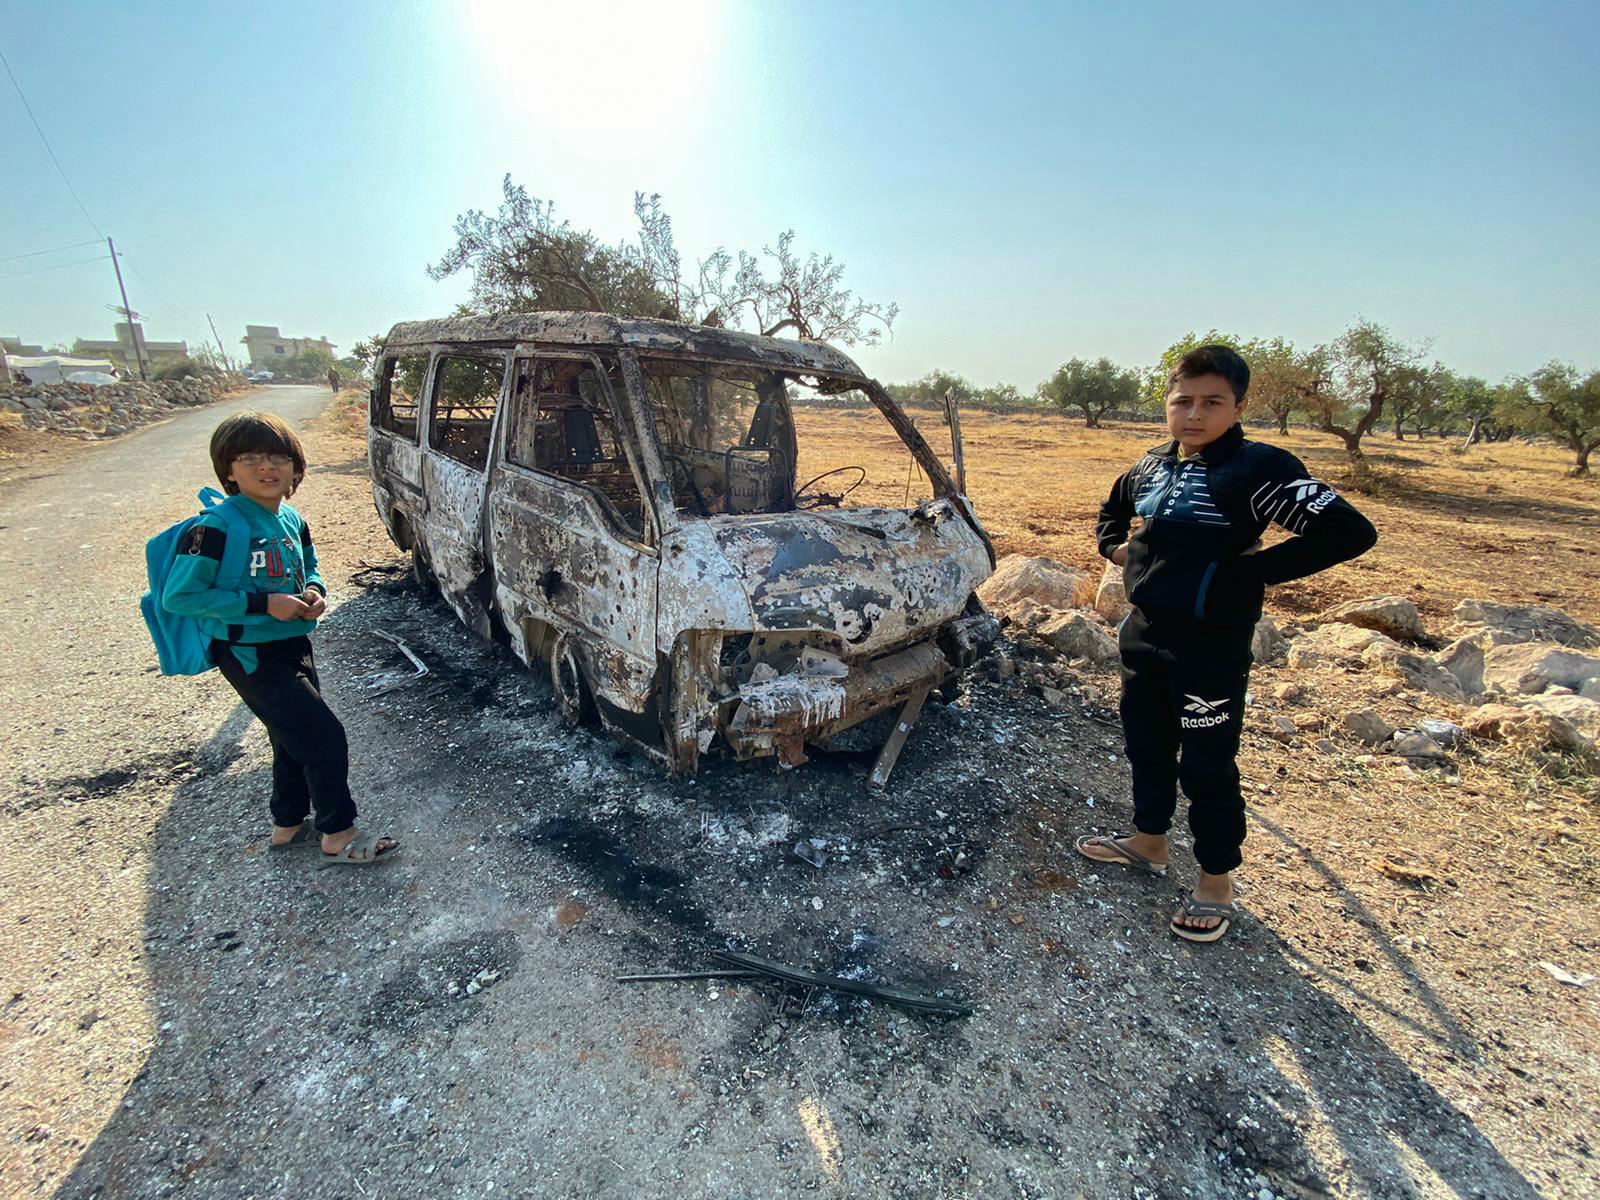 Syrian children stand next to a burnt vehicle near the site where a US raid targeted Baghdadi (AFP)